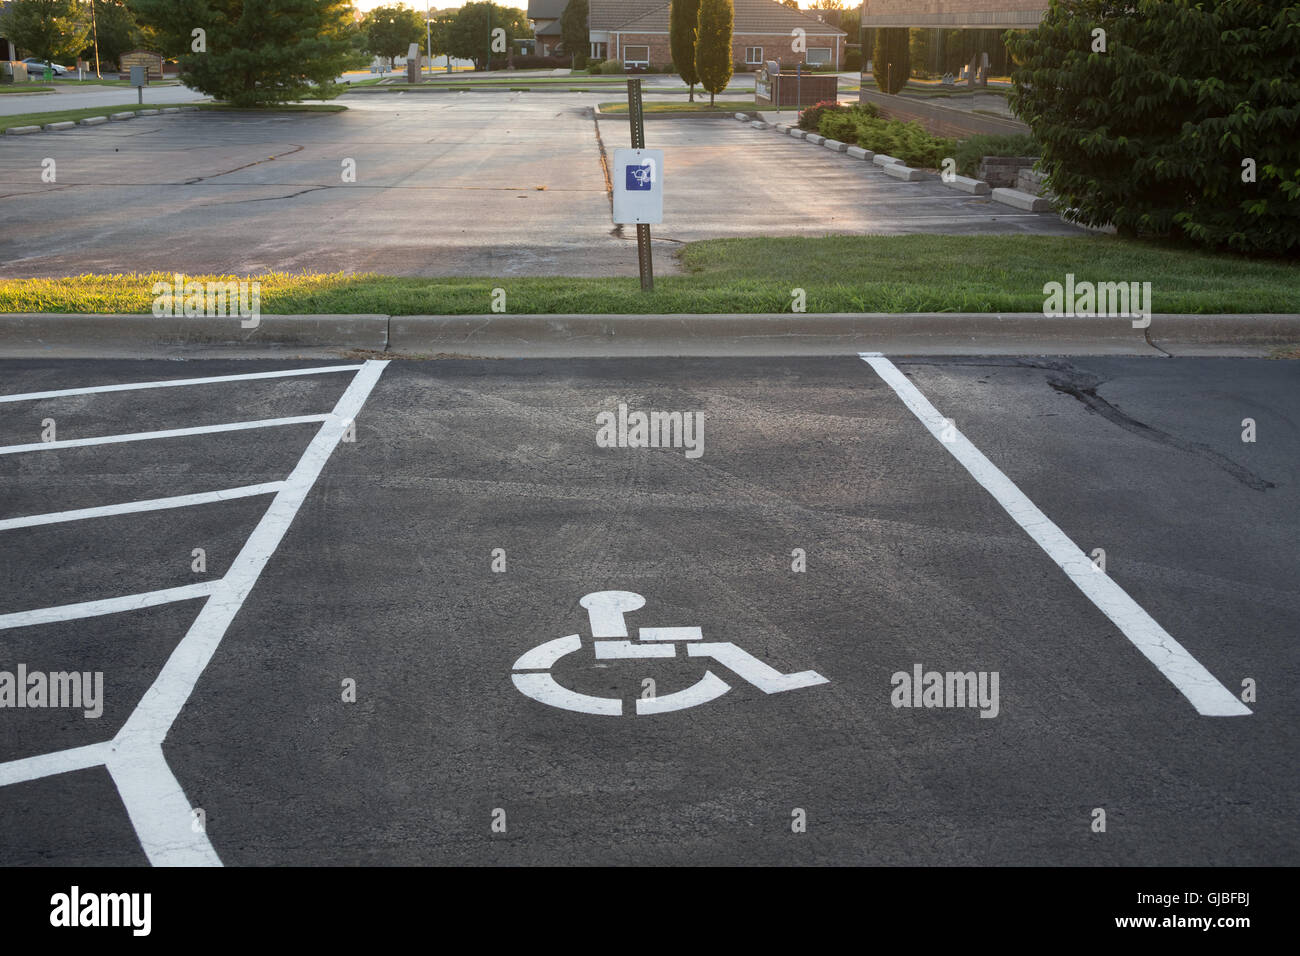 Handicap parking spaces and sign Stock Photo